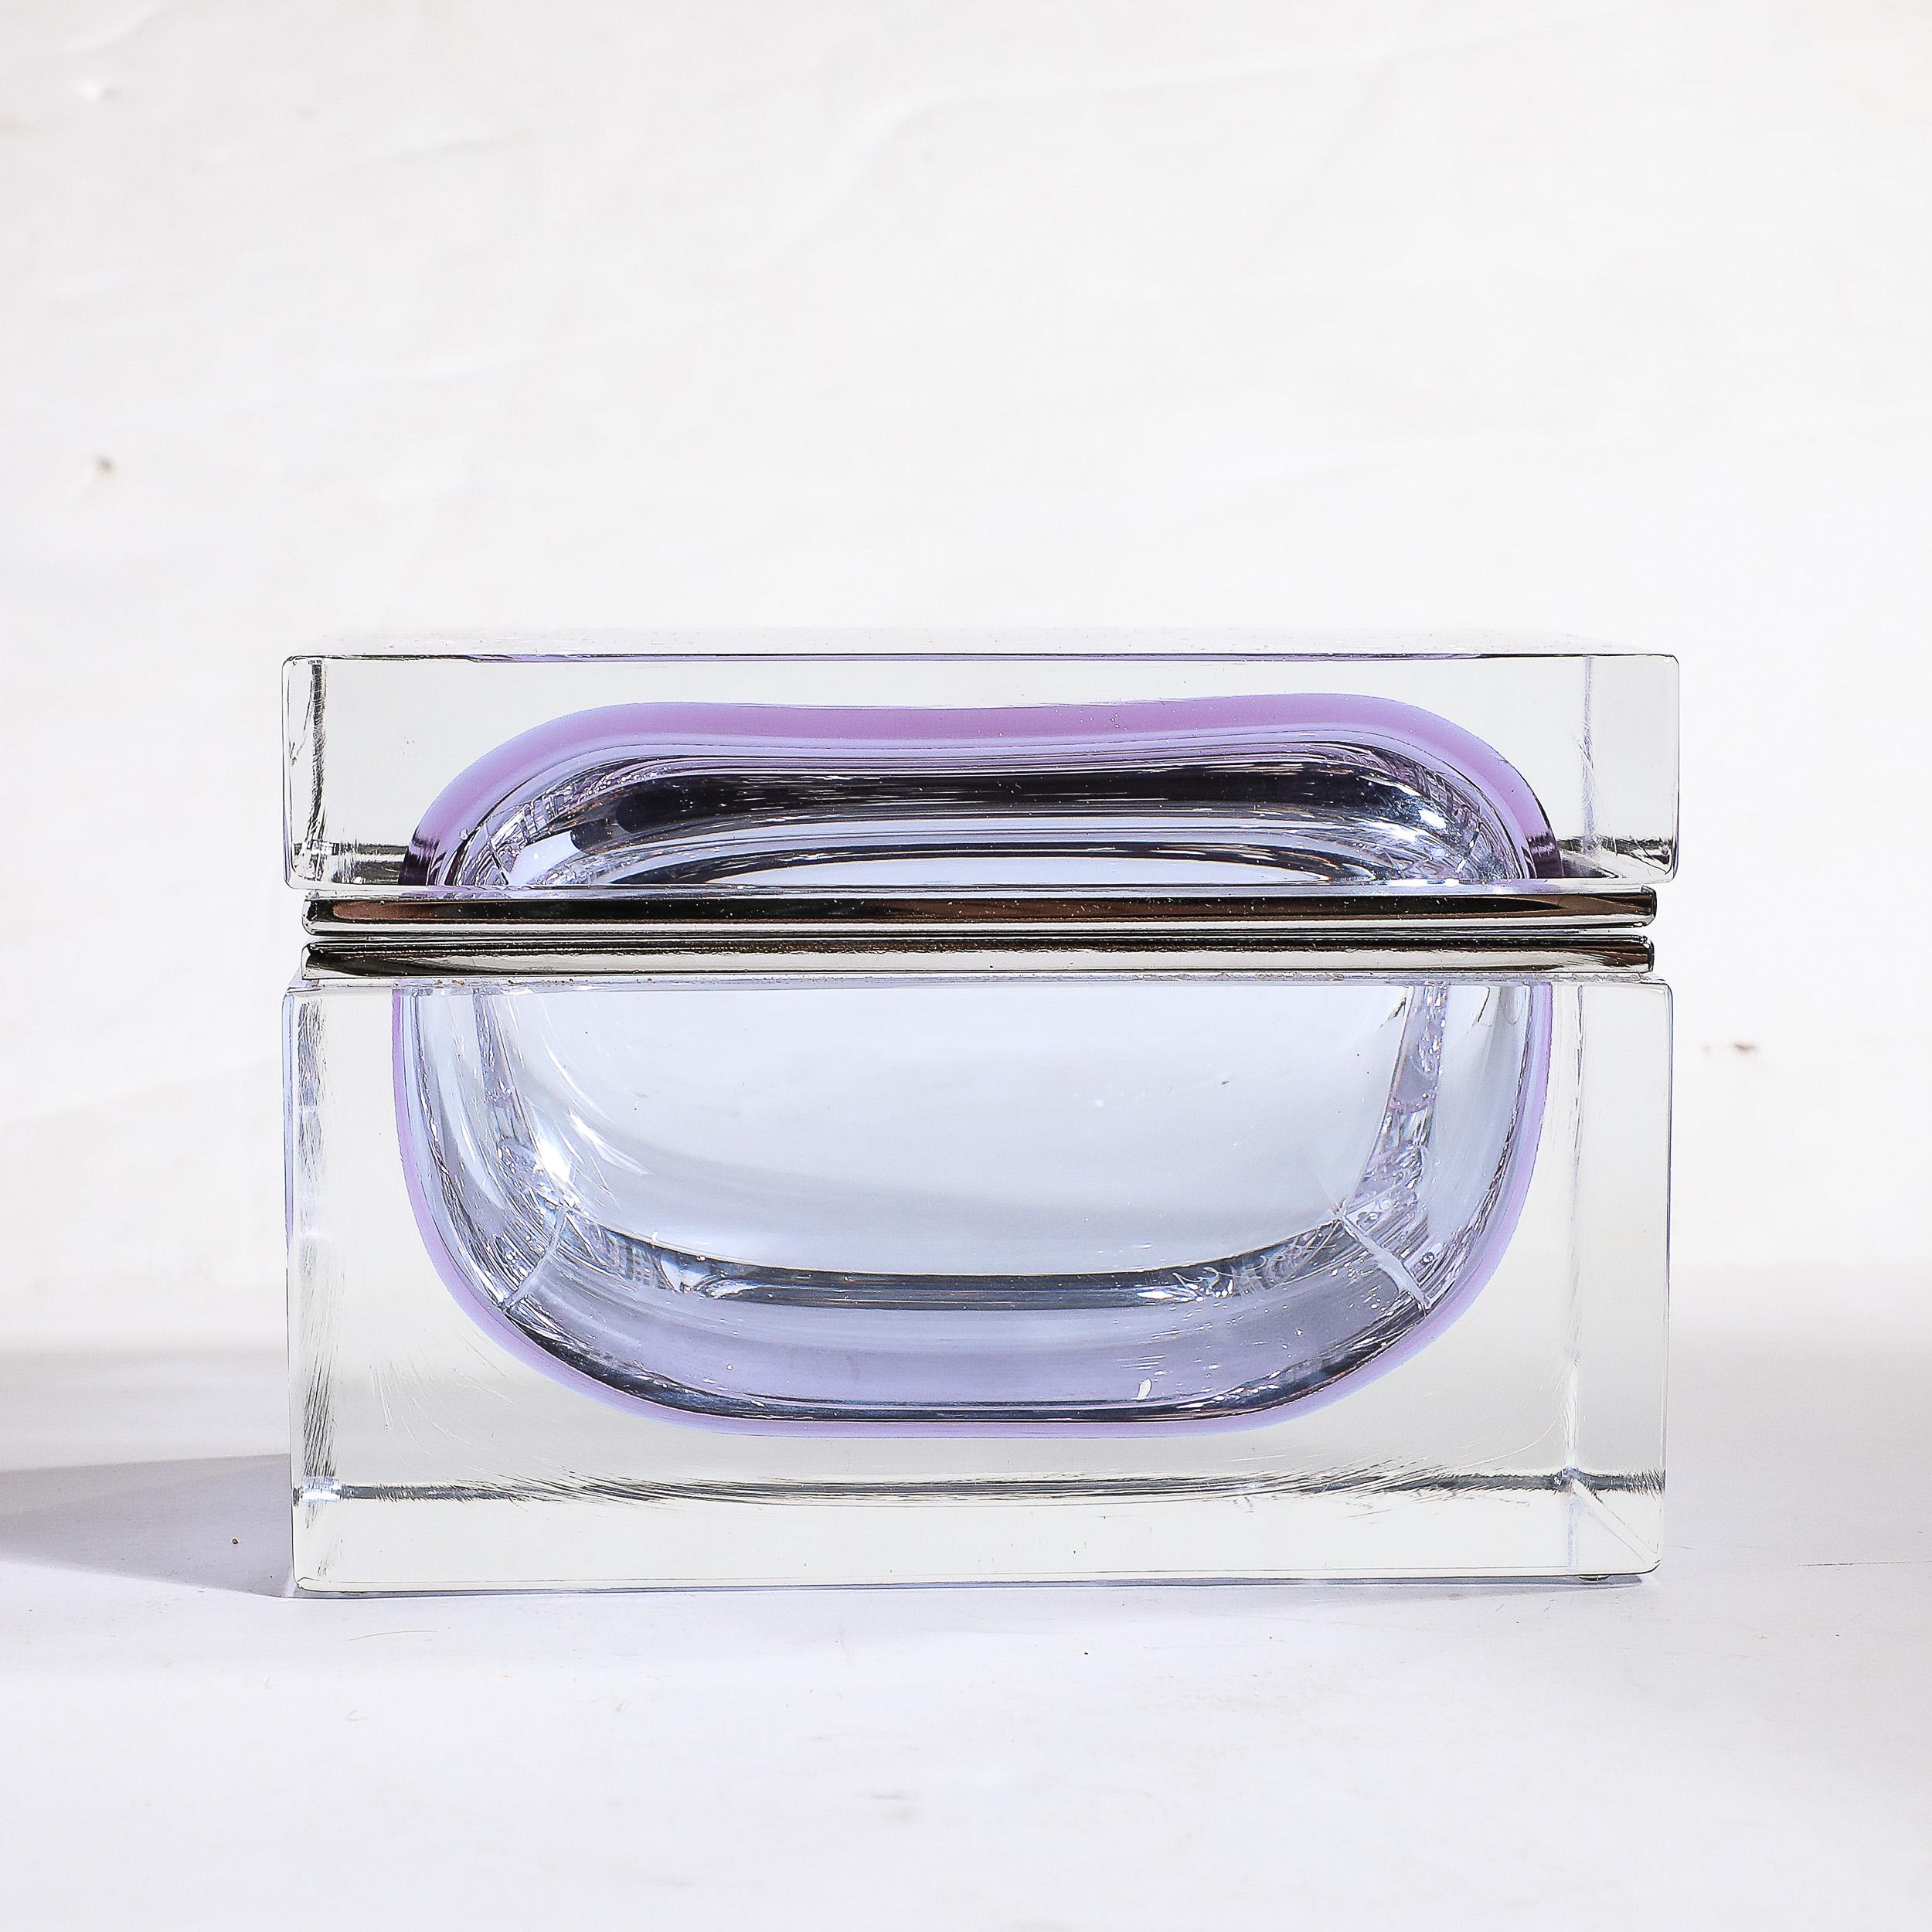 Modernist Hand-Blown Murano Glass Box in Lavender with Nickel Fittings For Sale 9